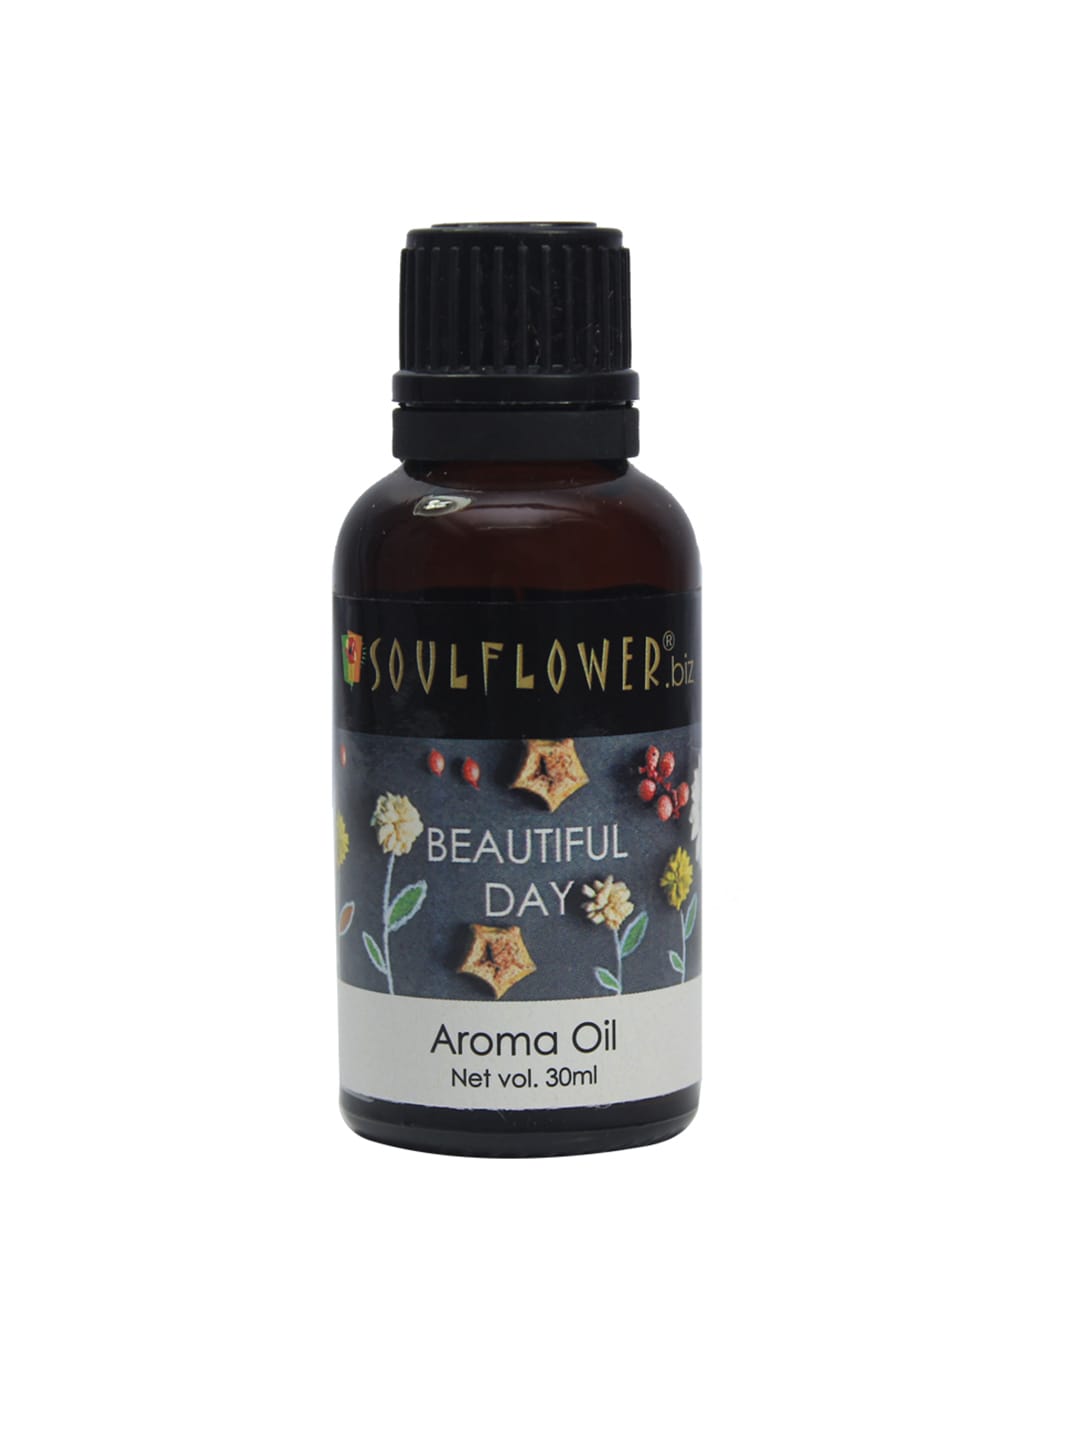 Soulflower Beautiful Day Aroma Oil 30 ml Price in India